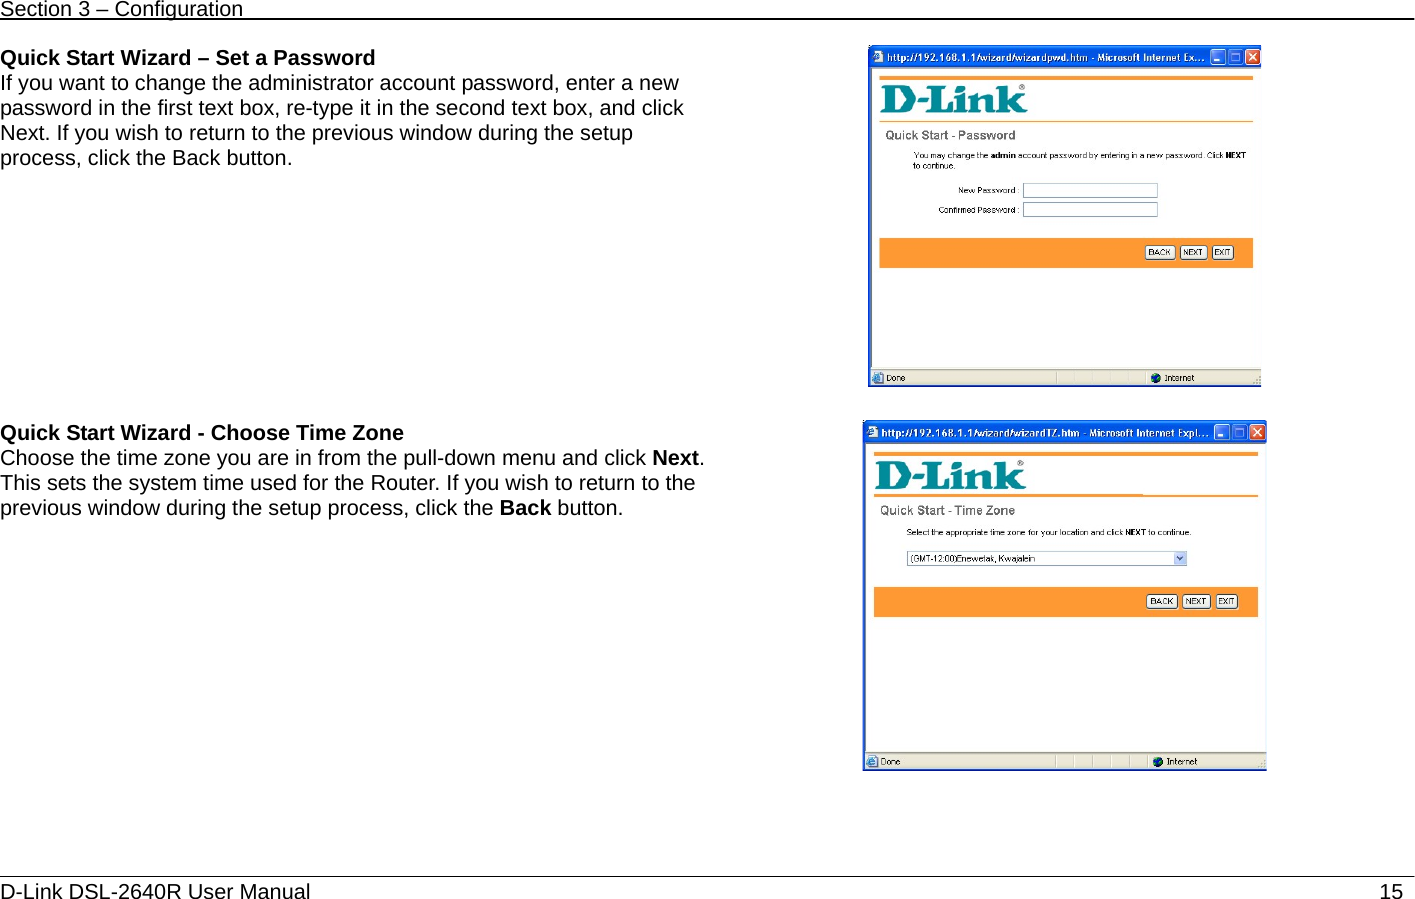 Section 3 – Configuration   D-Link DSL-2640R User Manual                           15Quick Start Wizard – Set a Password If you want to change the administrator account password, enter a new password in the first text box, re-type it in the second text box, and click Next. If you wish to return to the previous window during the setup process, click the Back button.      Quick Start Wizard - Choose Time Zone Choose the time zone you are in from the pull-down menu and click Next. This sets the system time used for the Router. If you wish to return to the previous window during the setup process, click the Back button.      